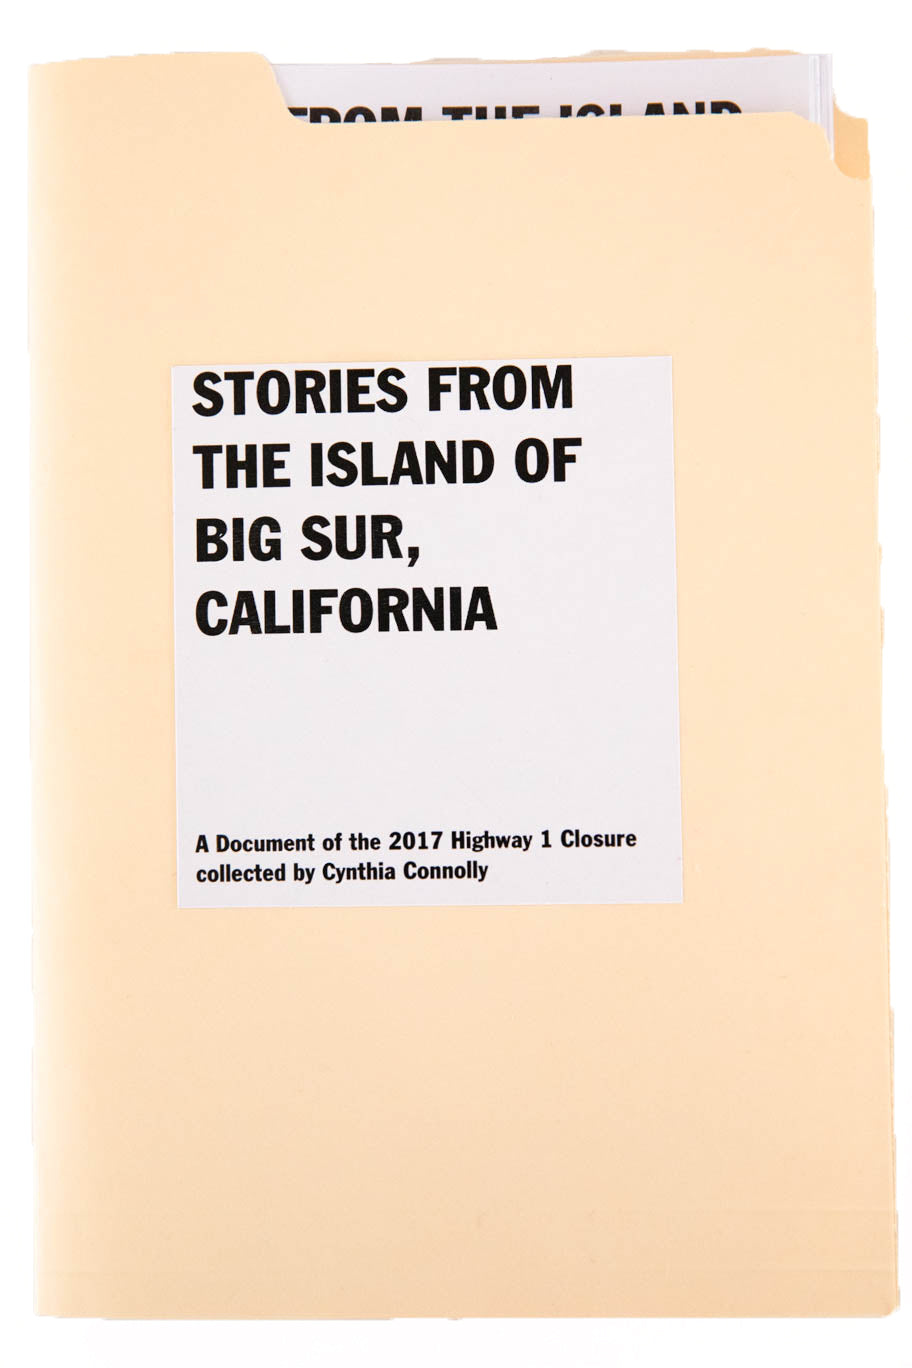 STORIES FROM THE ISLAND OF BIG SUR, CALIFORNIA